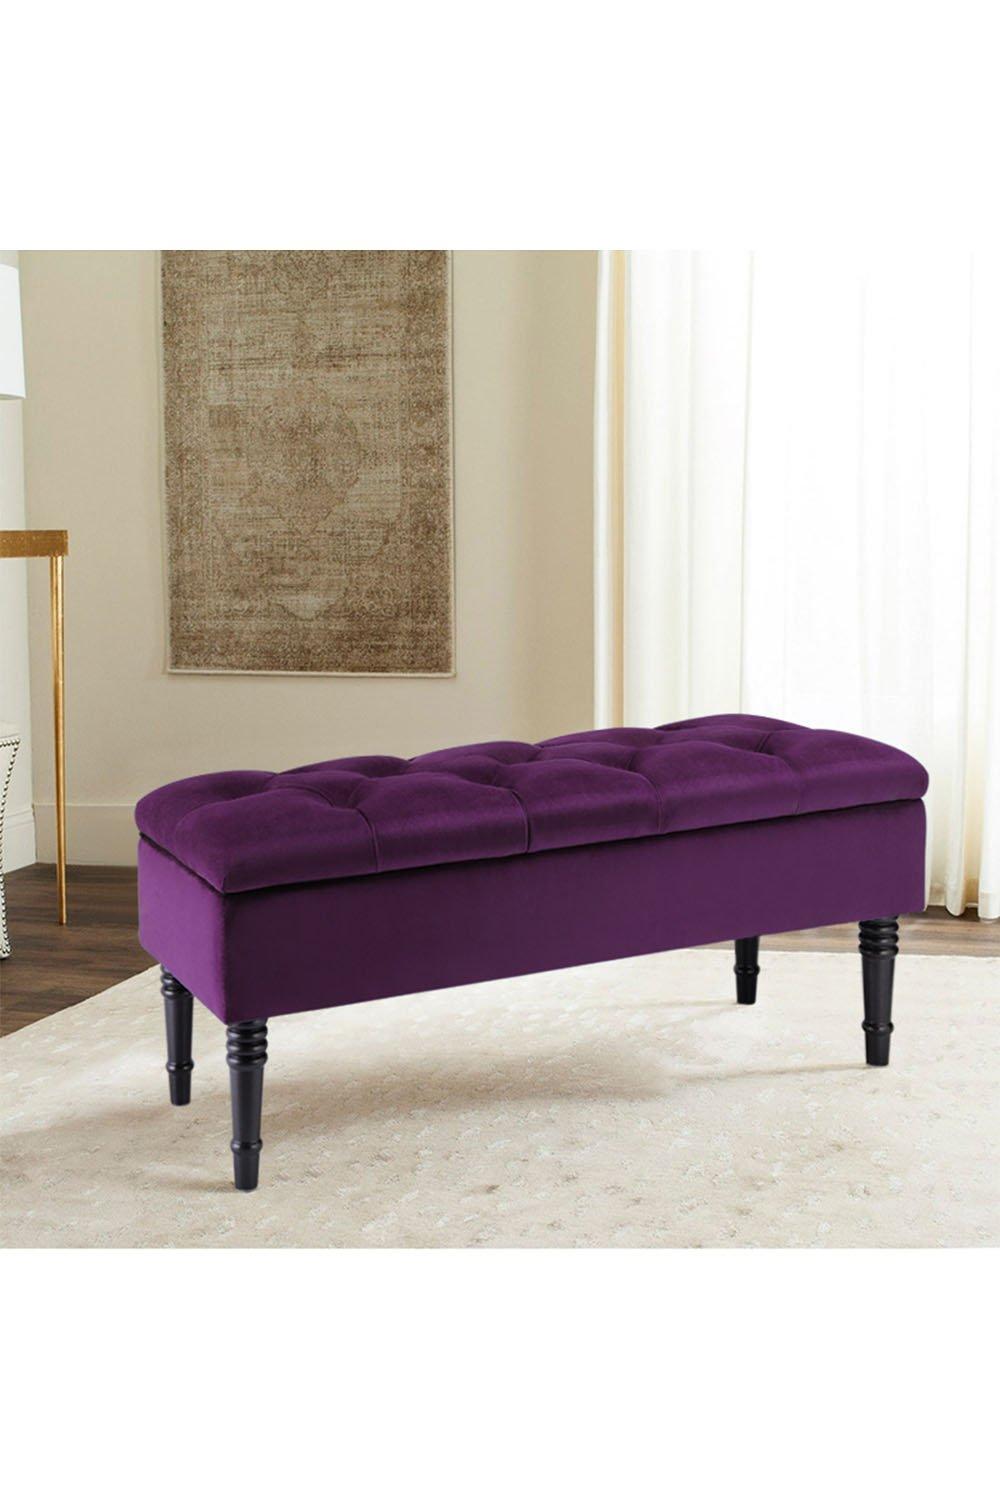 Purple Buttoned Tufted Velvet Storage Ottoman Bench with Rubberwood Legs Luxury Bed End Stool